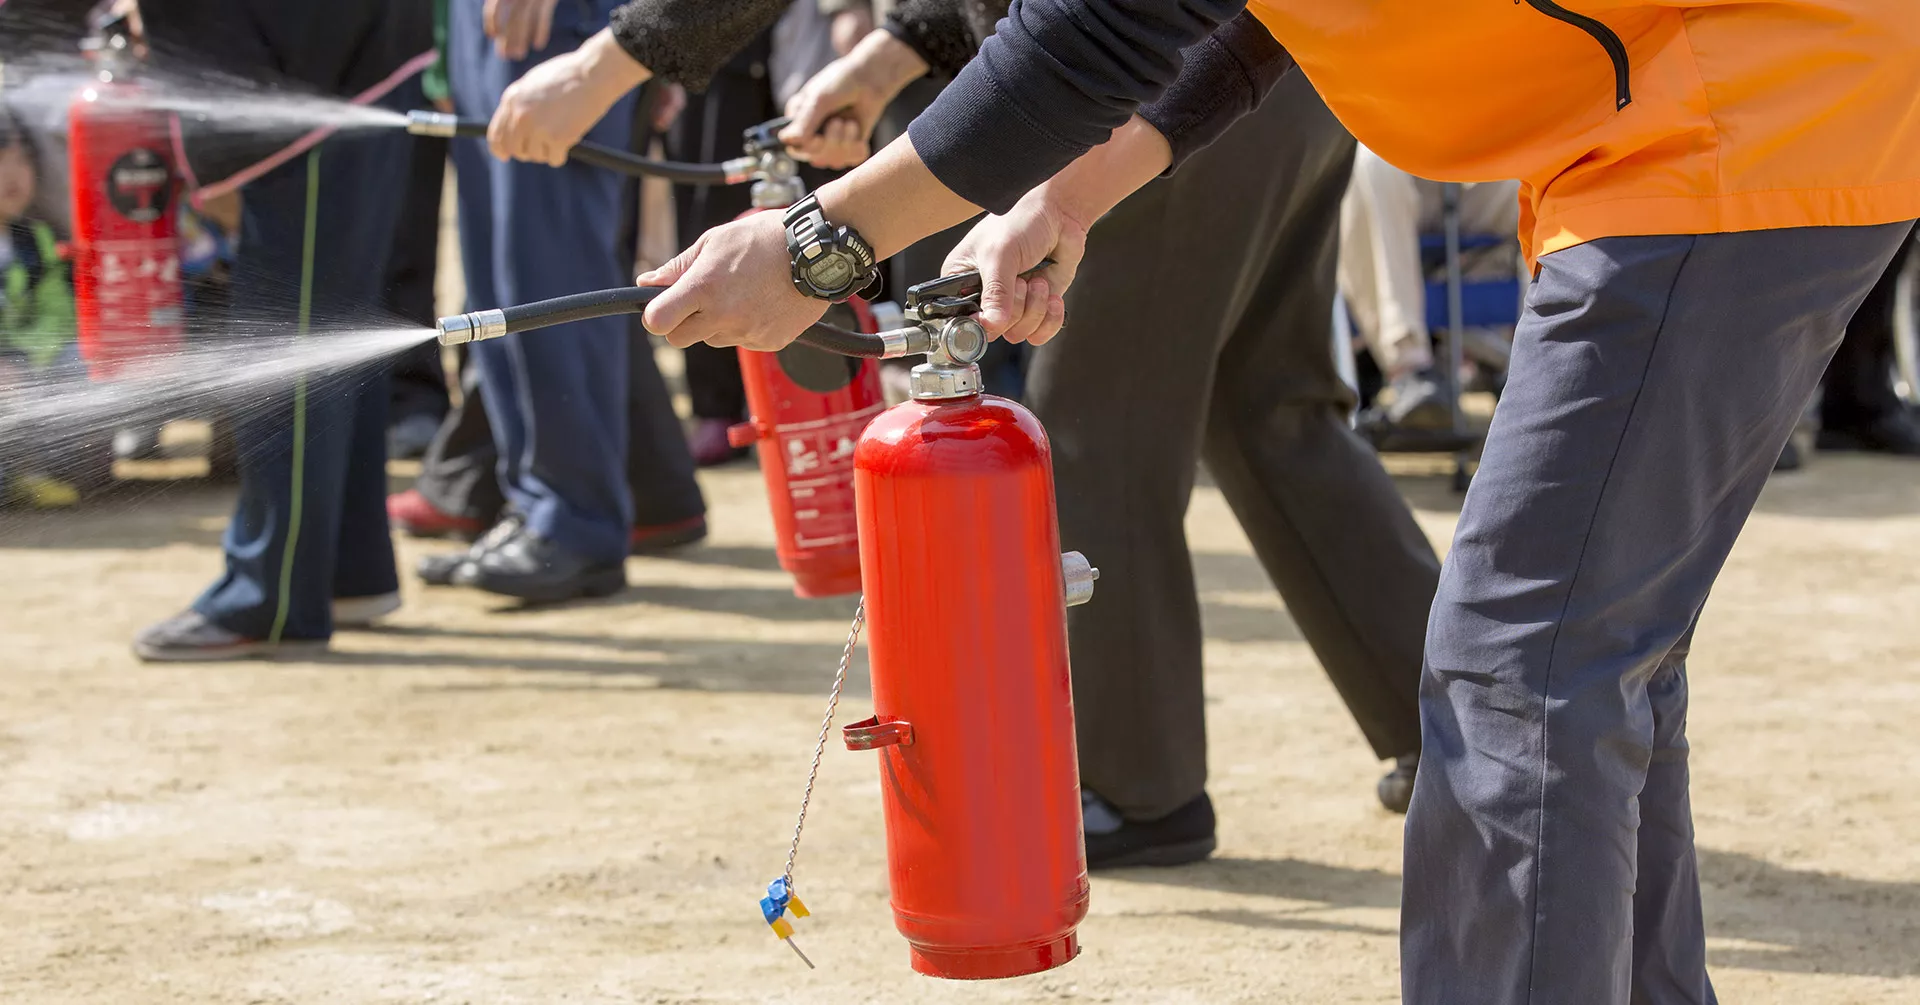 Reasons Your Staff Needs Professional Fire Extinguisher Training